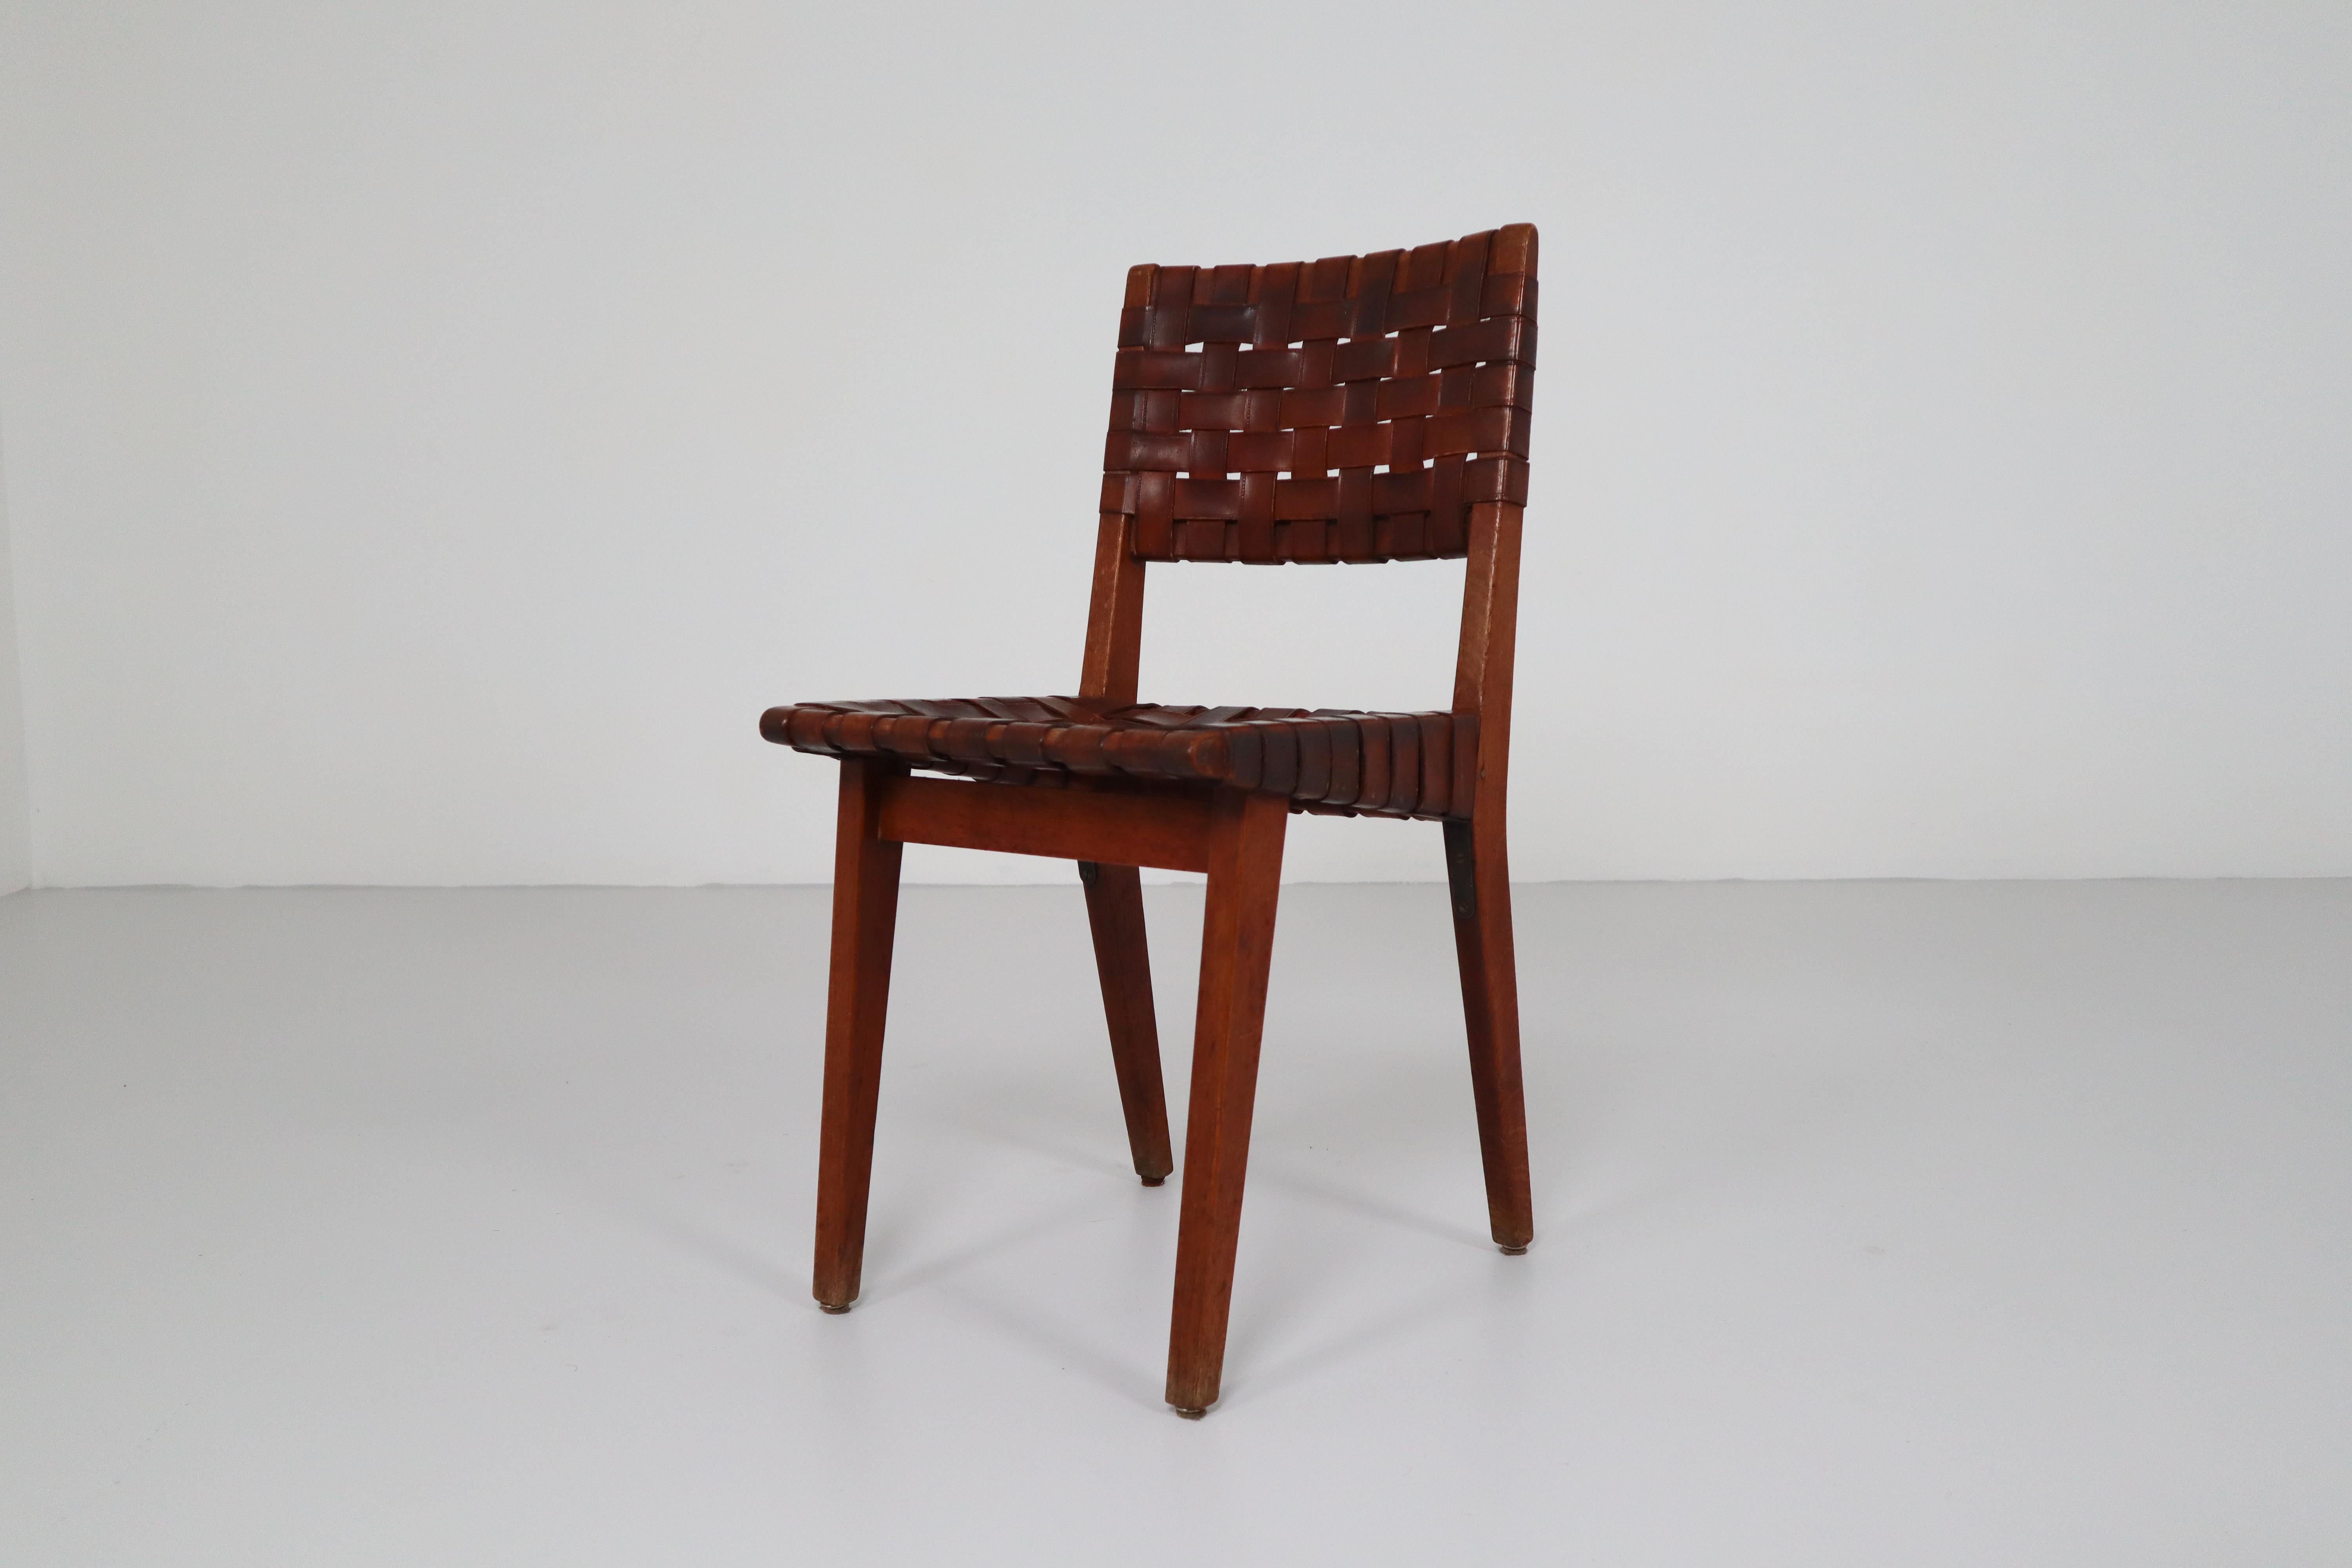 Oak Early Woven Leather Side Chairs Model No. 666 by Jens Risom for Knoll, 1940s